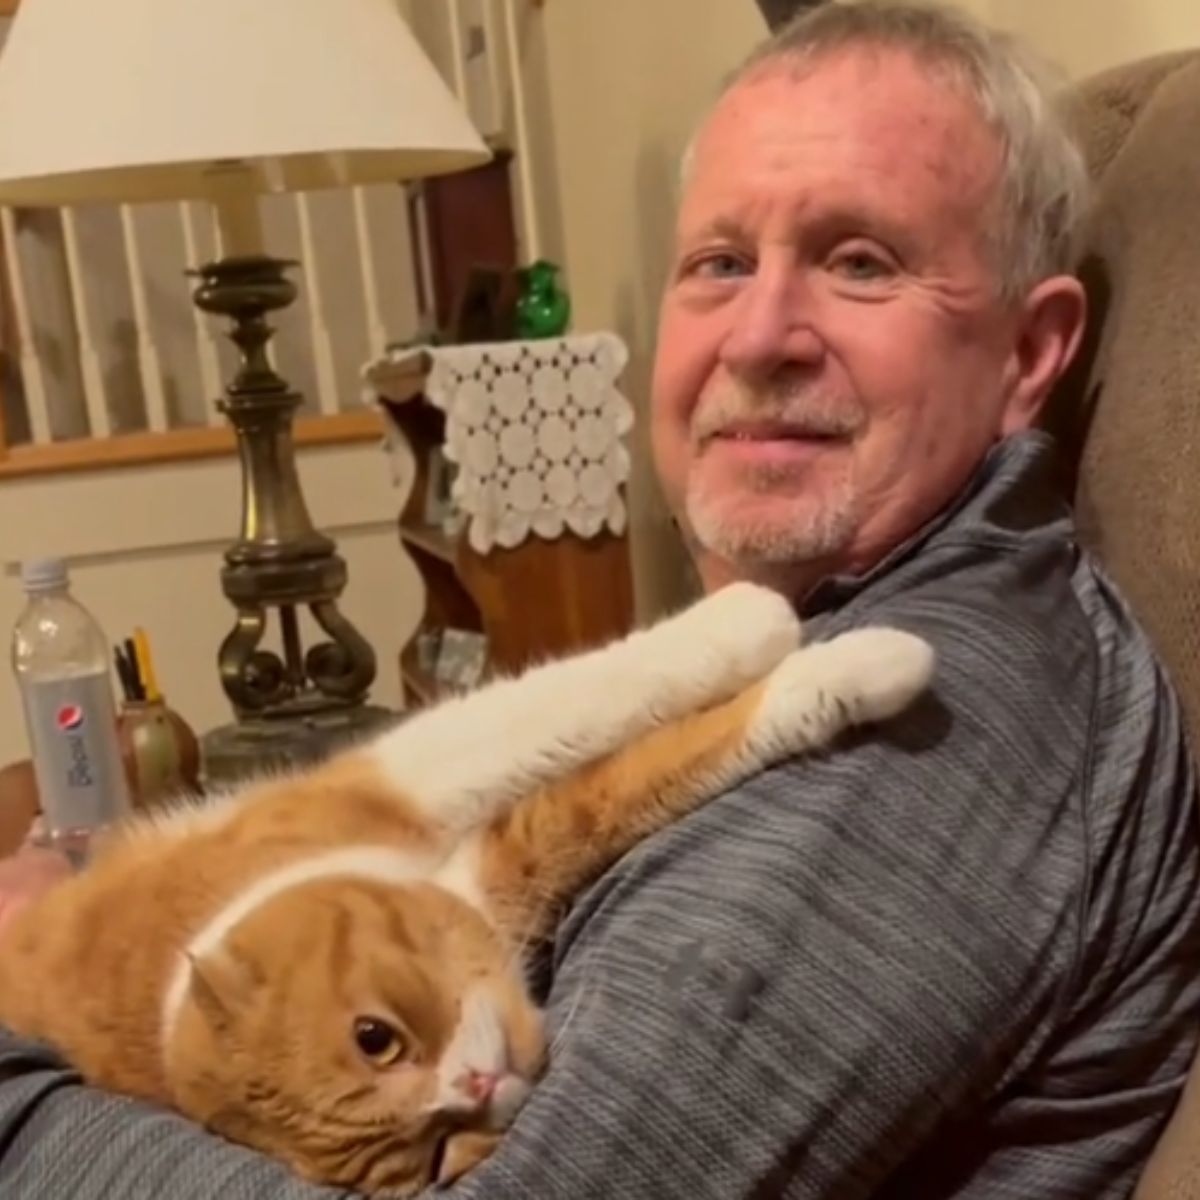 smiling man posing with cat on sofa